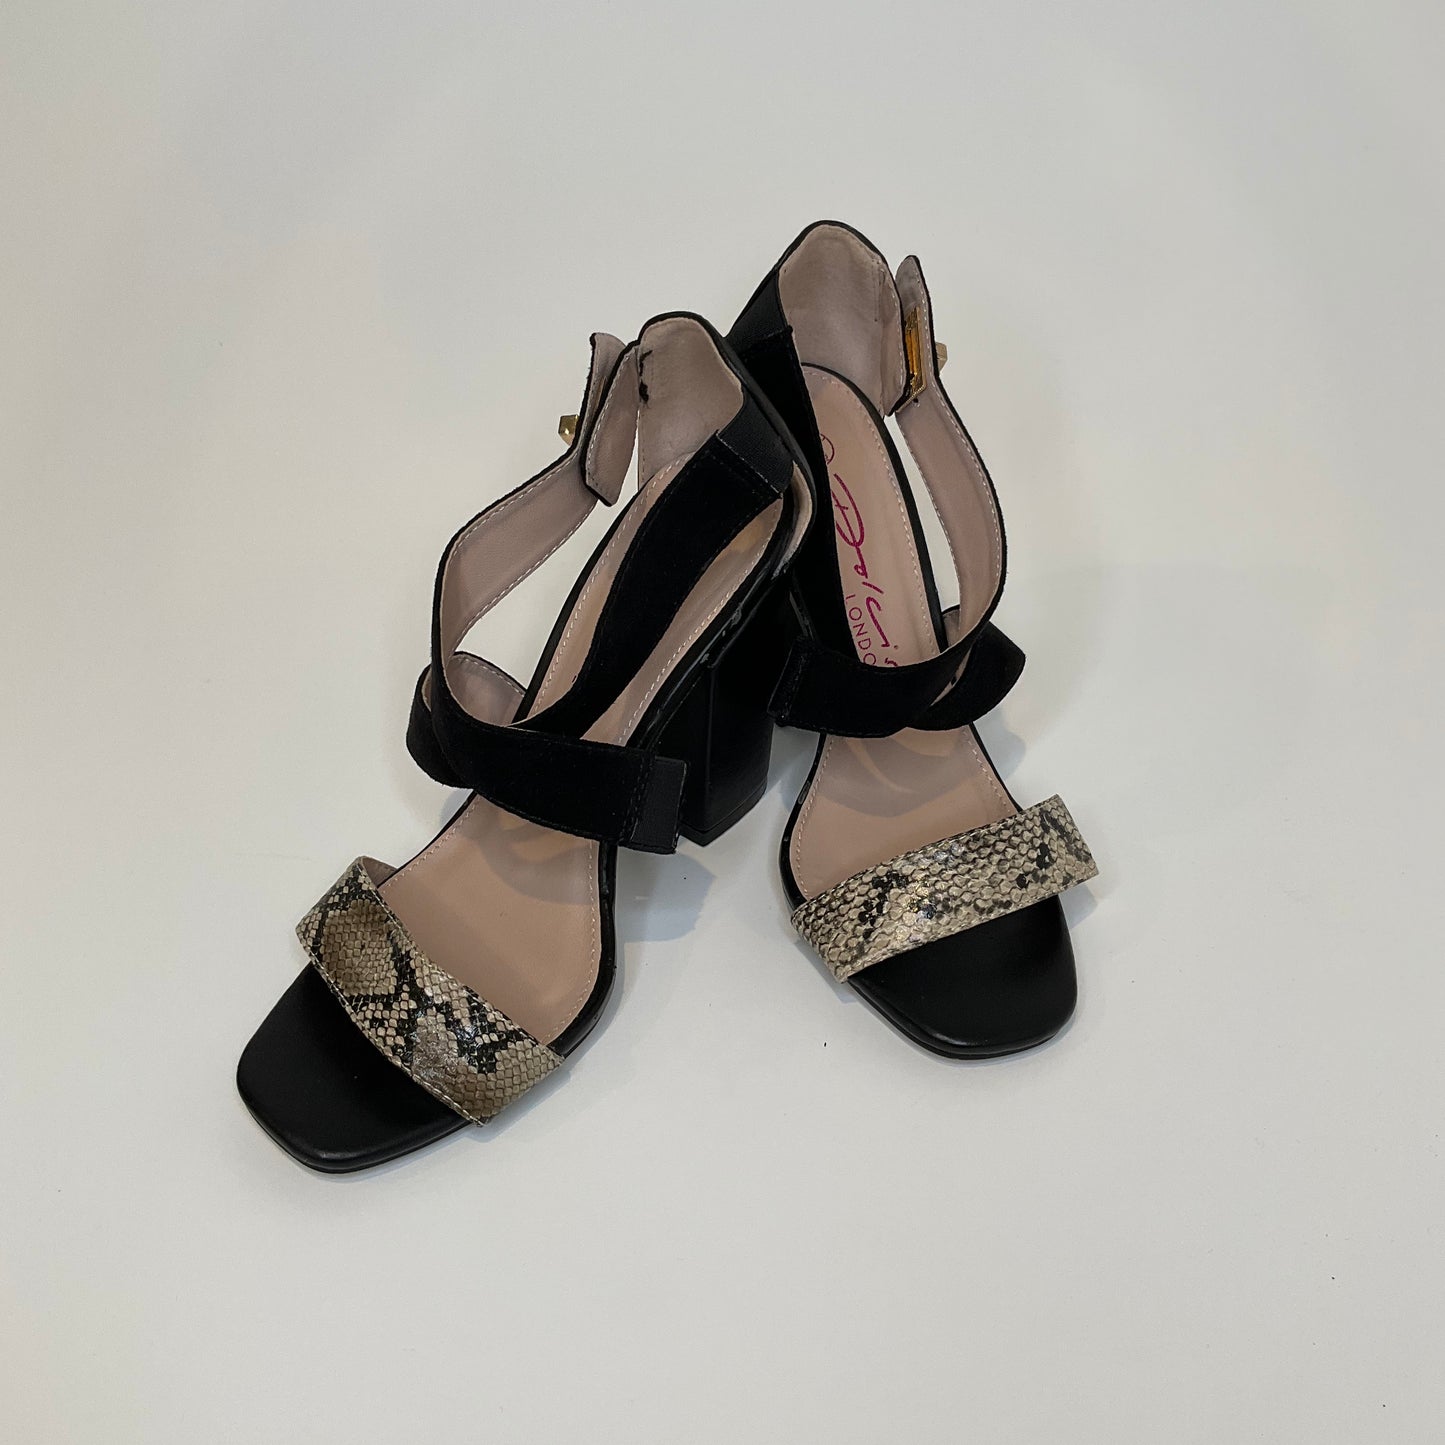 Dolcis - Shoes - Size 6